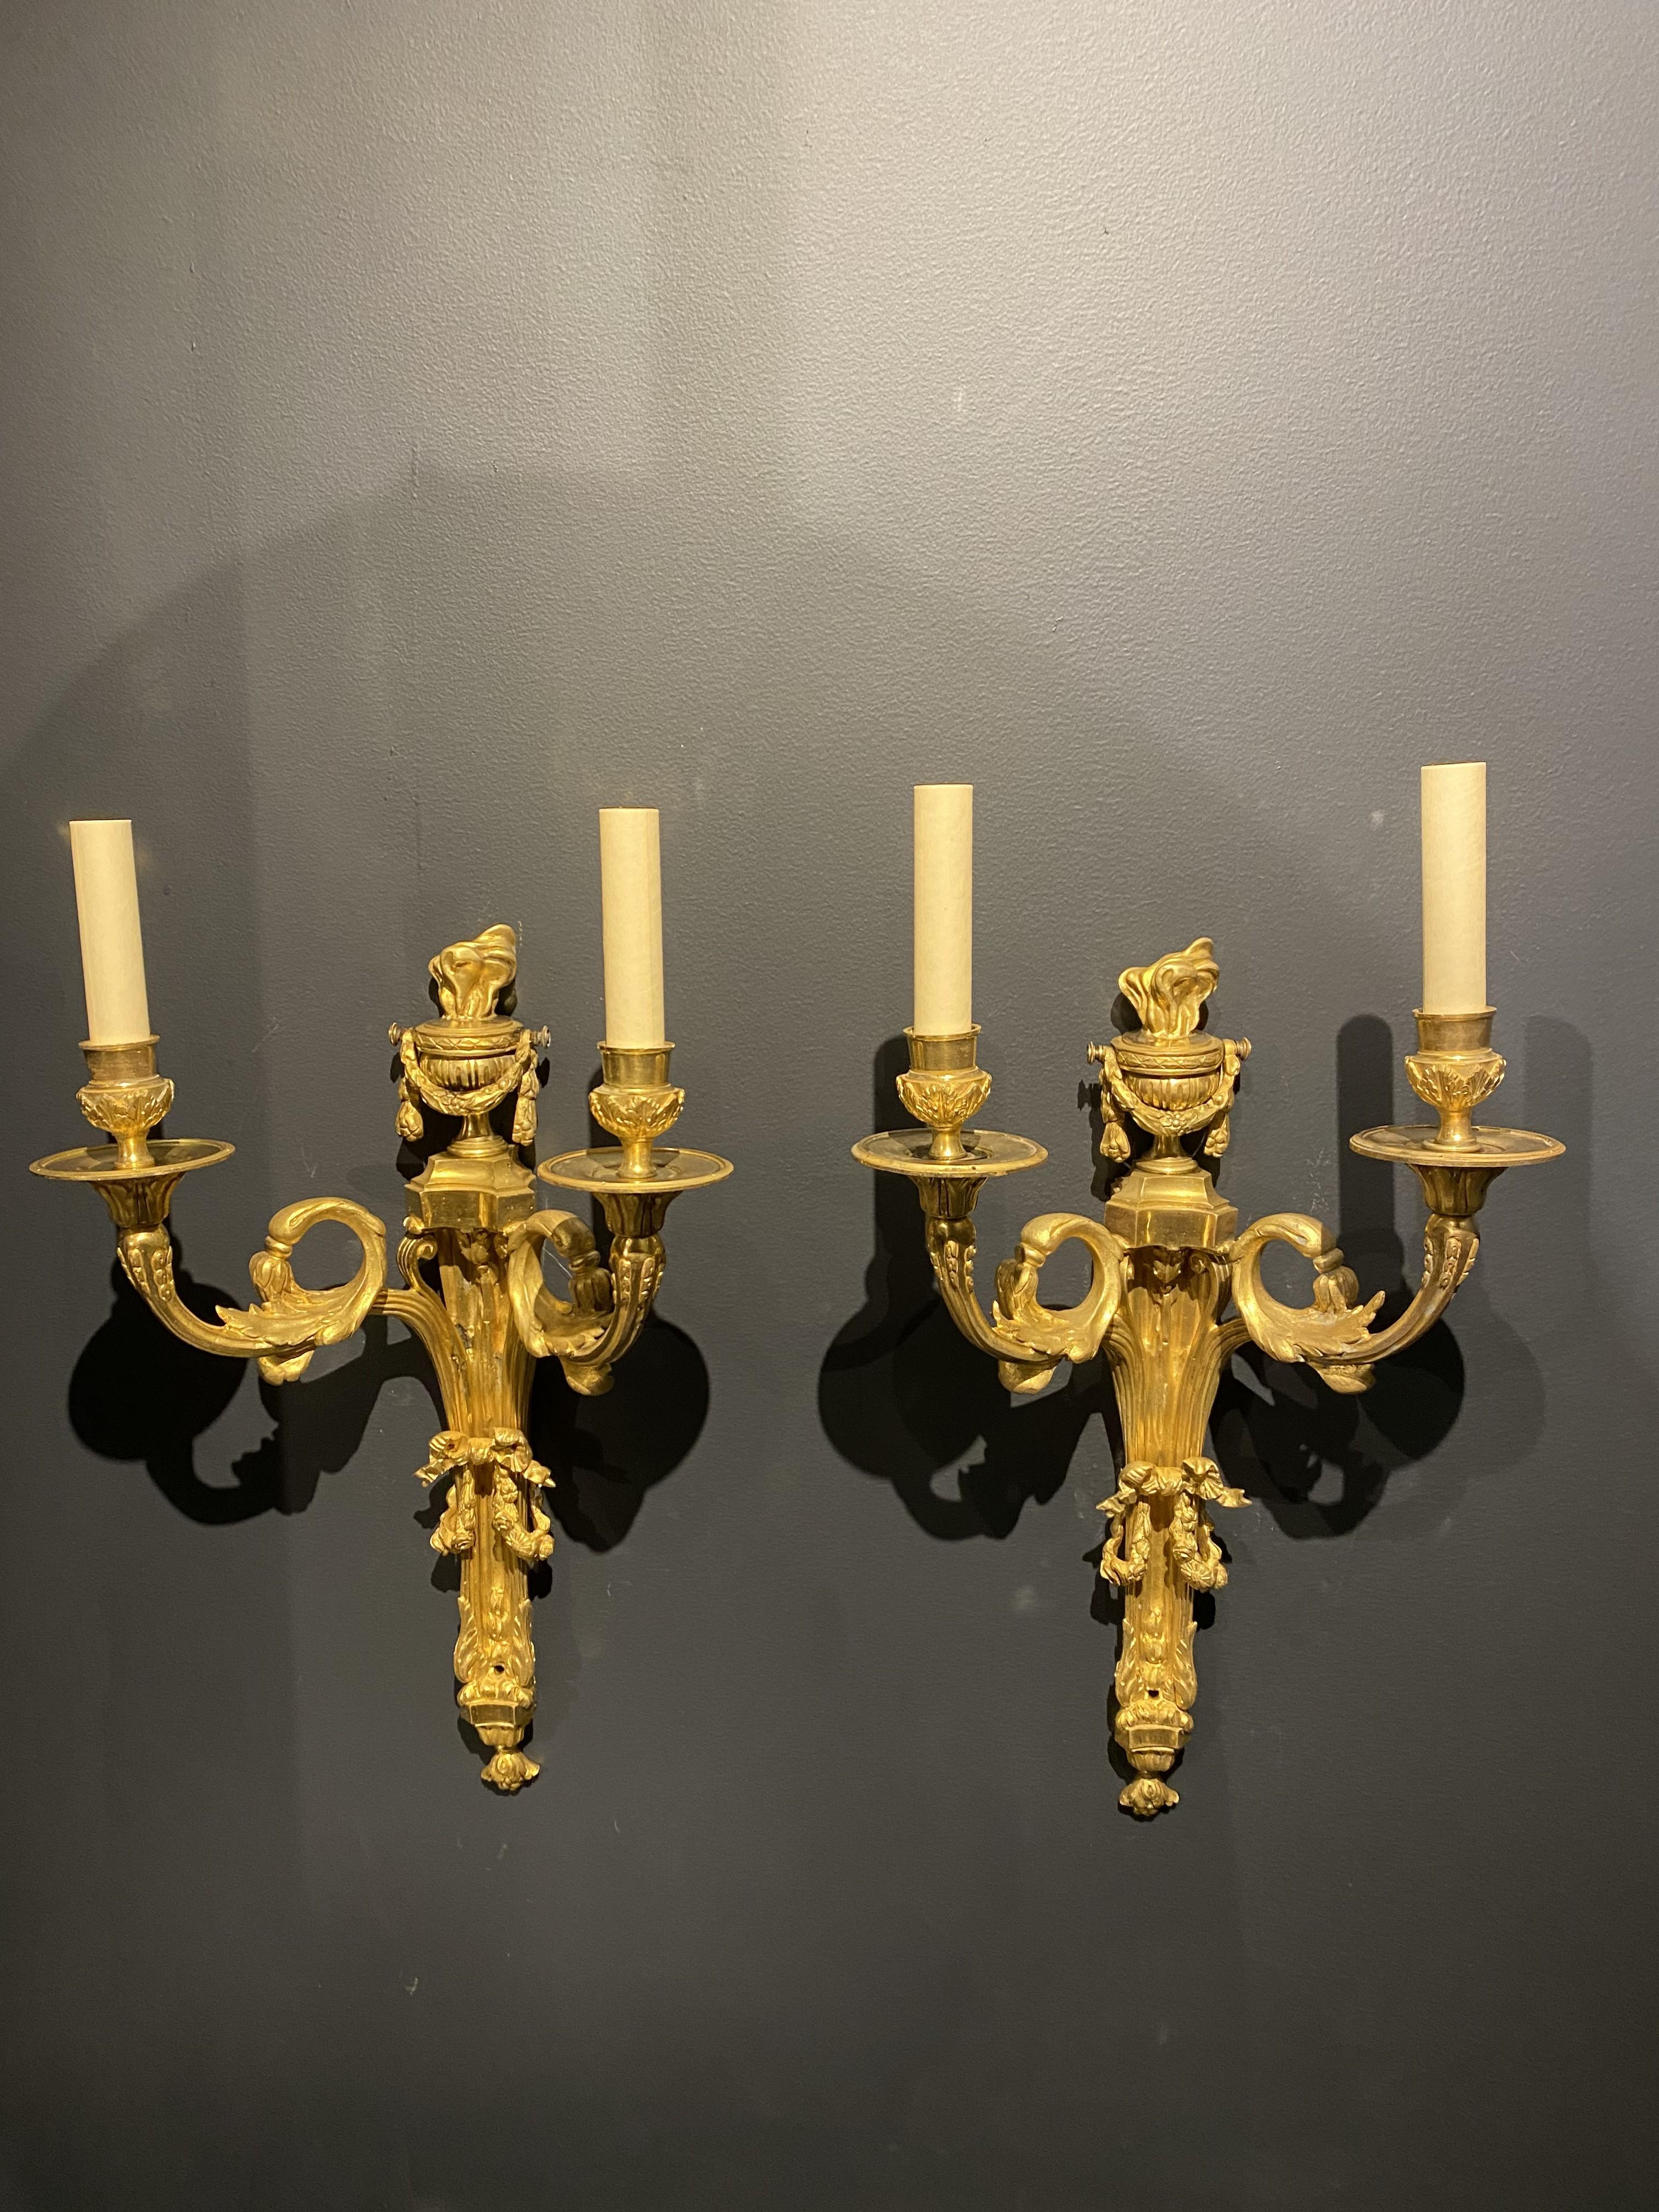 Early 20th Century 1900s French Gilt Bronze Sconces with Twisted Arms For Sale